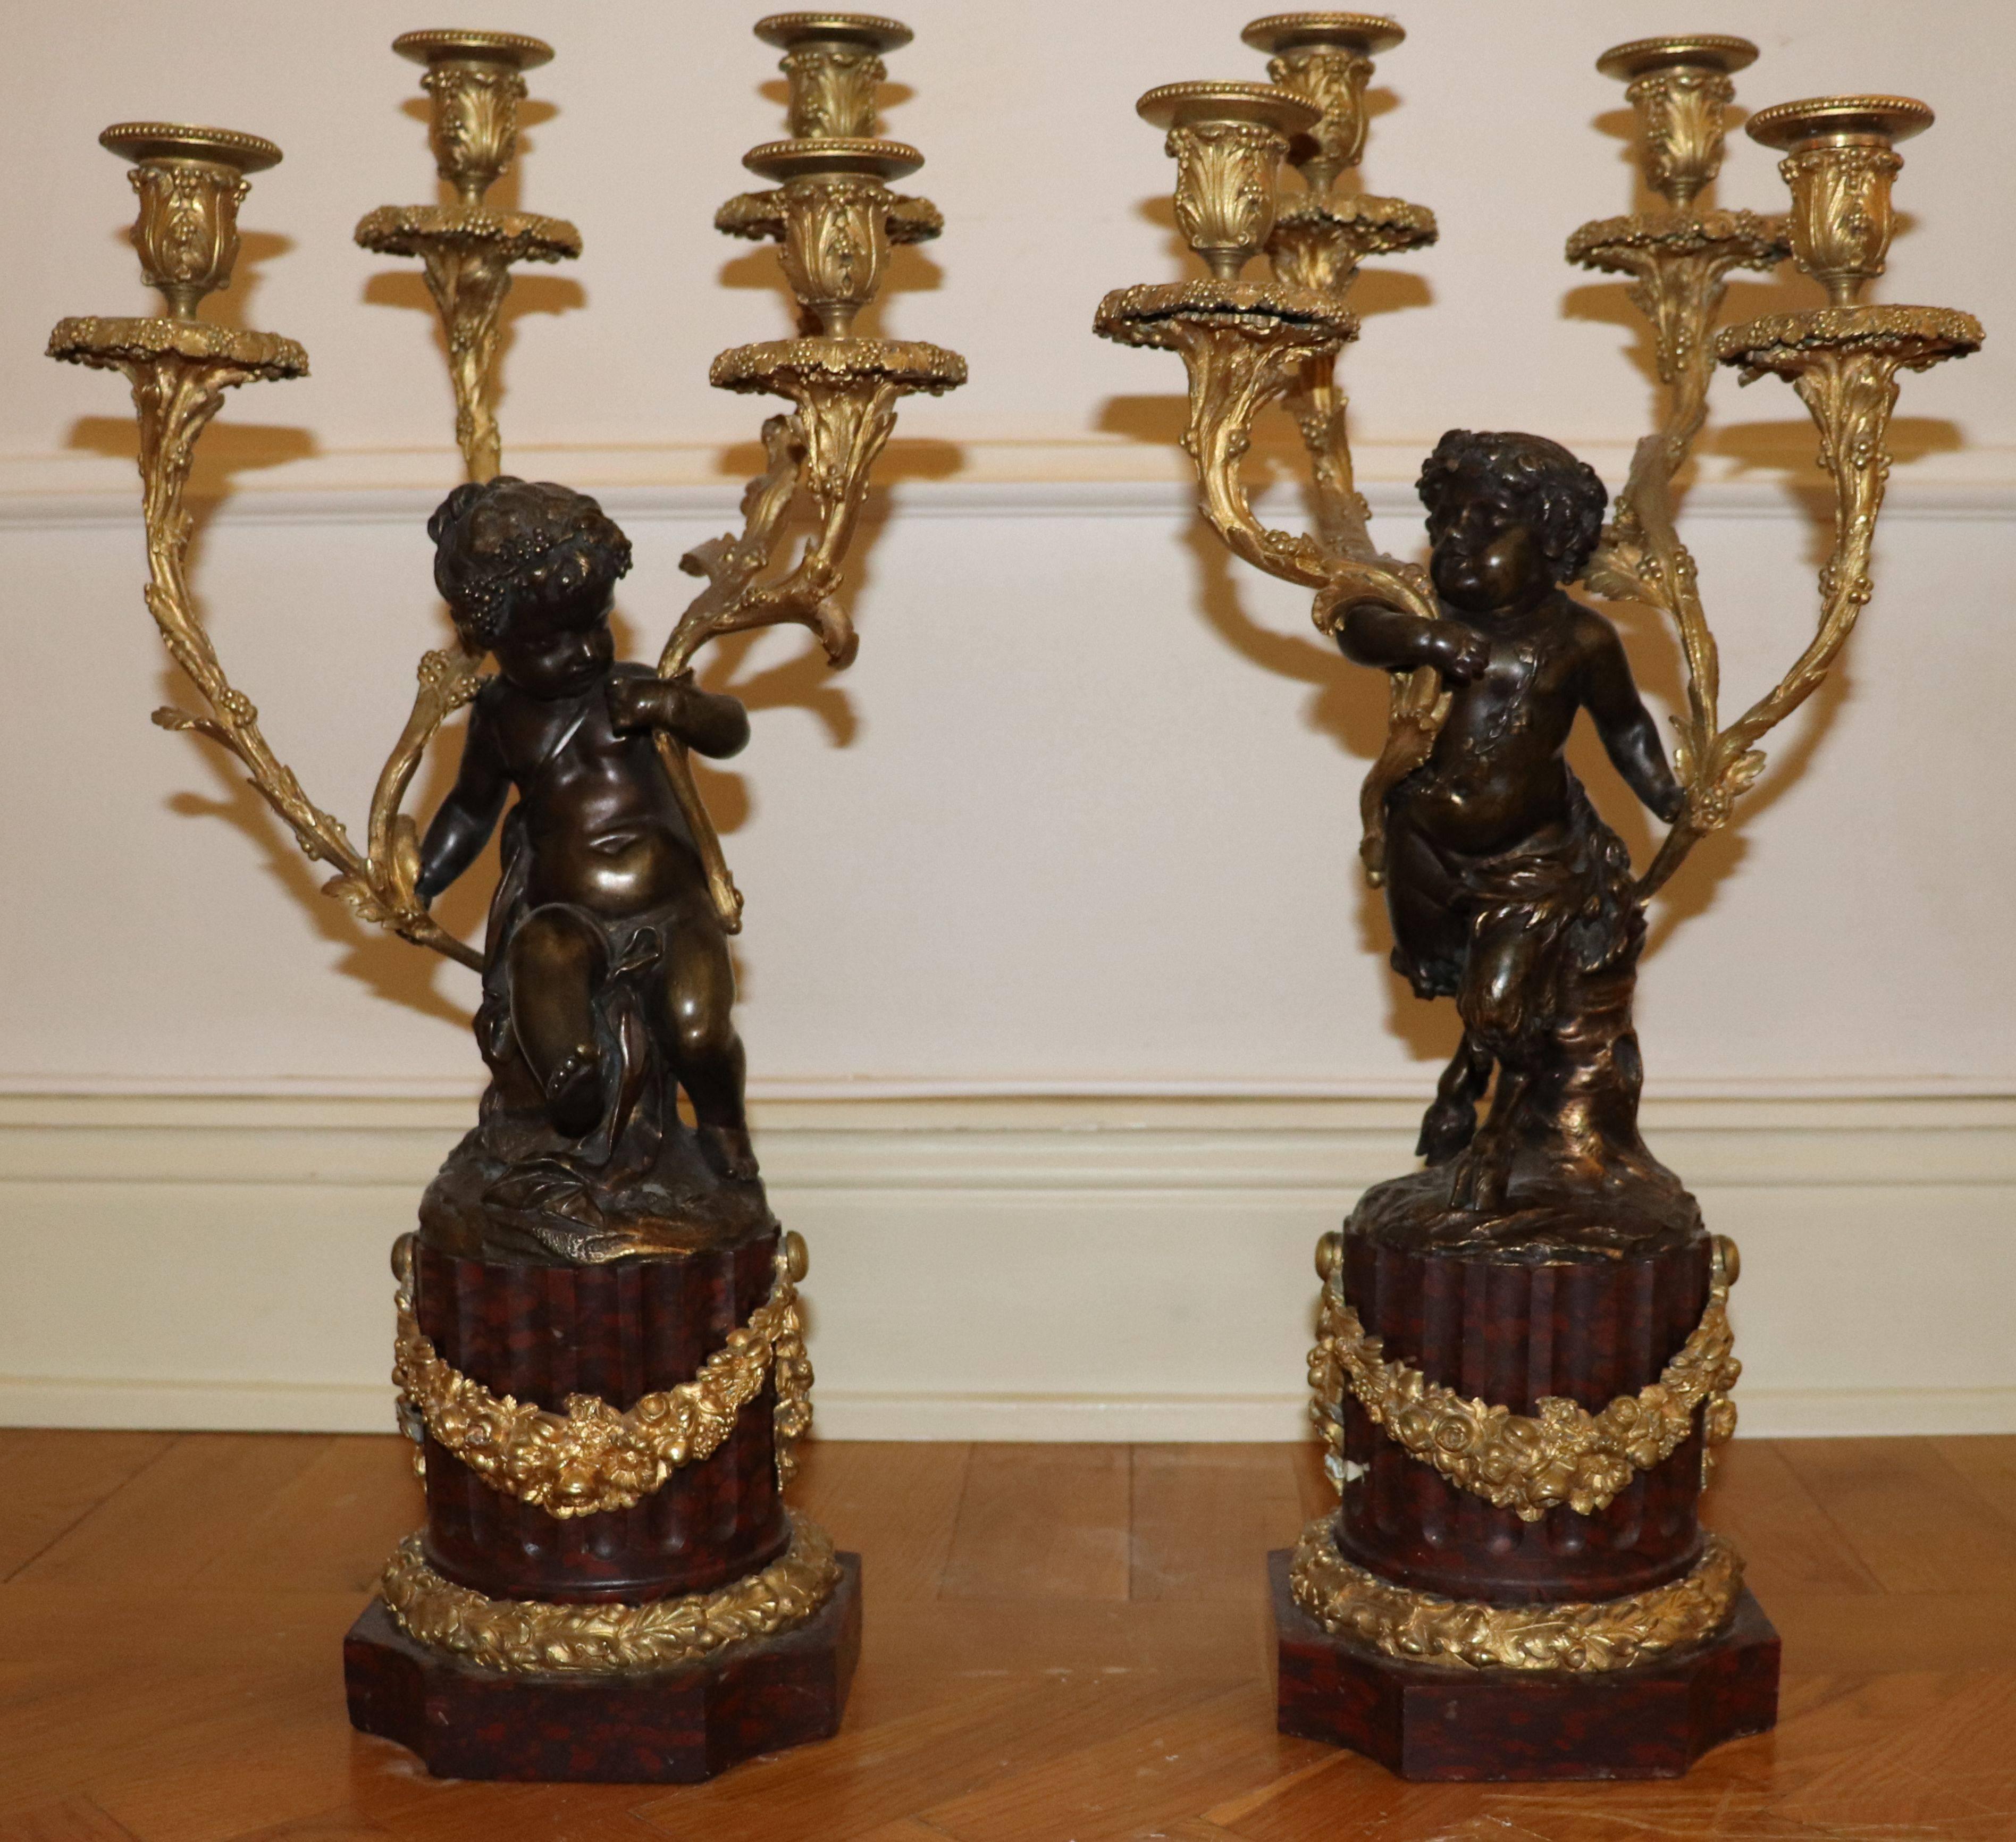 A pair of Louis XVI gilt bronze and patinated candelabra attributed Jean-Louis Prieur
depicting one female cherub and one male satyr cherub holding four candle arms/holders each.